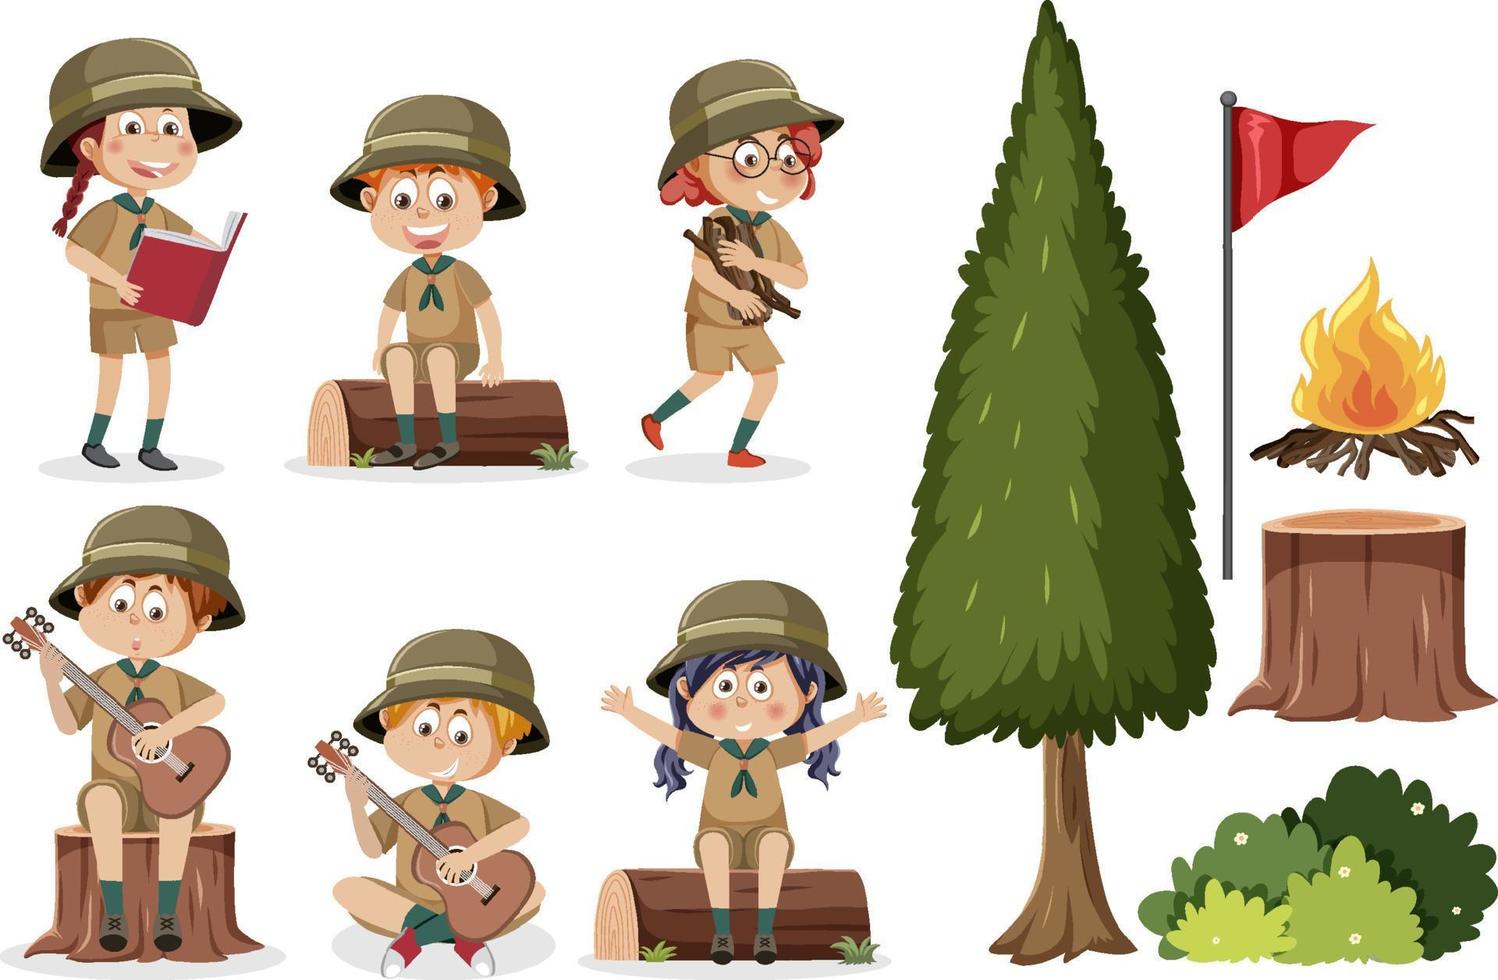 Children camping out cartoon character set vector